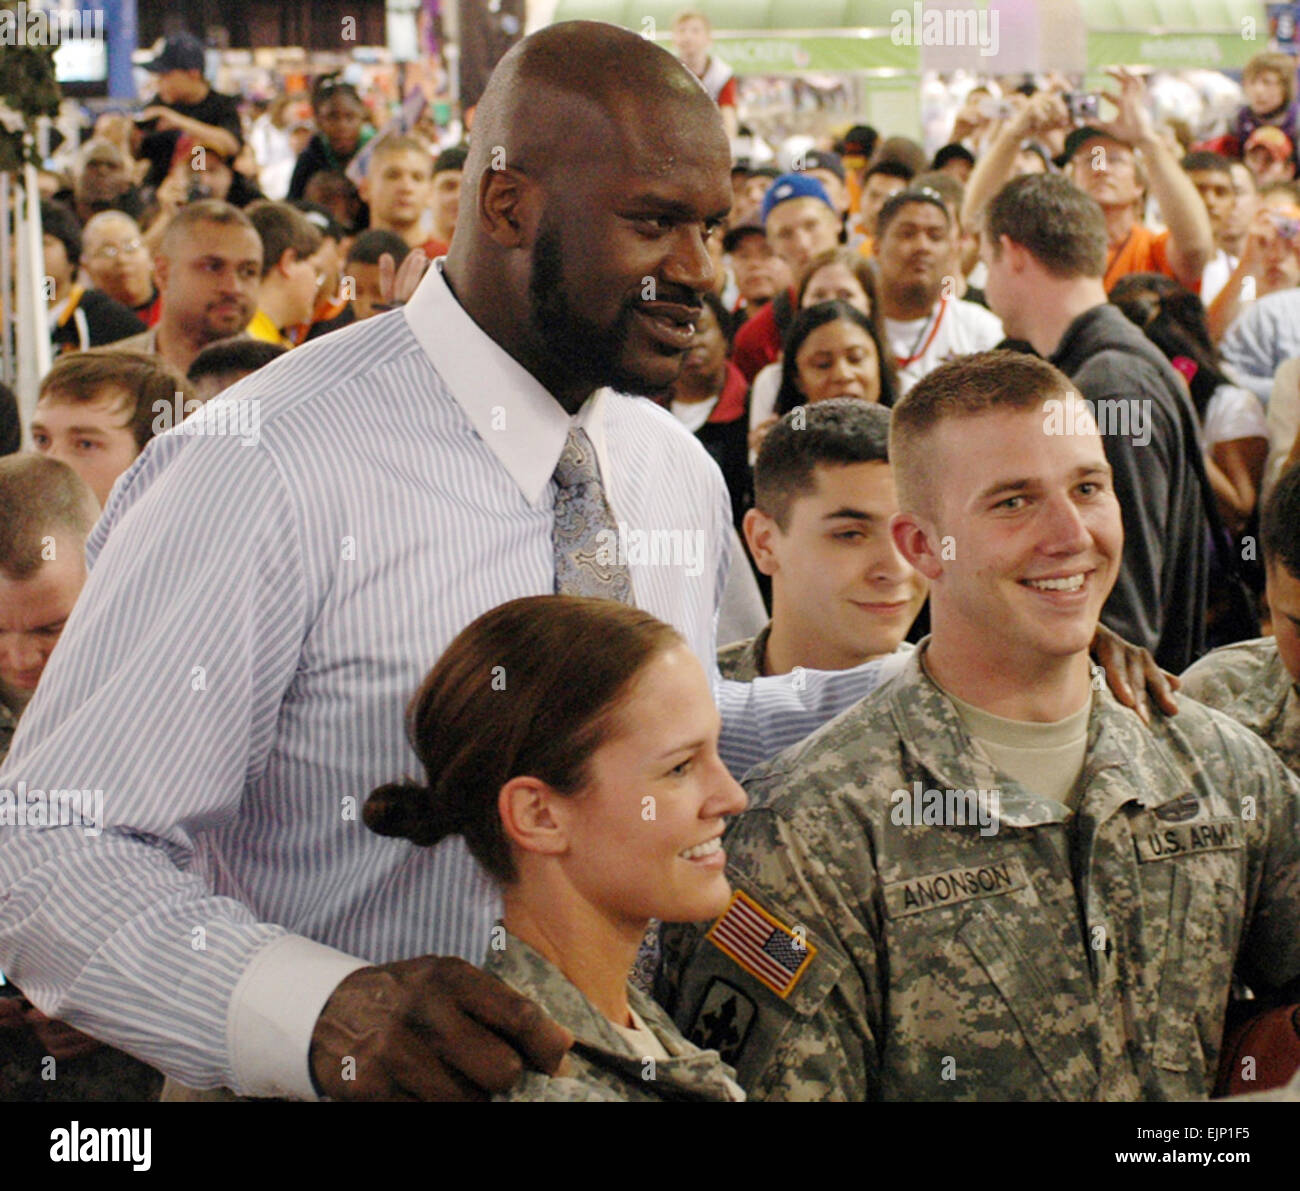 Army National Guard members Staff Sgt. Maygen Matson, left, and Spc. Taylor Anonson pose for a photo with National Basketball Association superstar Shaquille O'Neal during NBA All-Star Weekend in Phoenix, Feb. 15, 2009.  Tech. Sgt. Angela Walz. Stock Photo